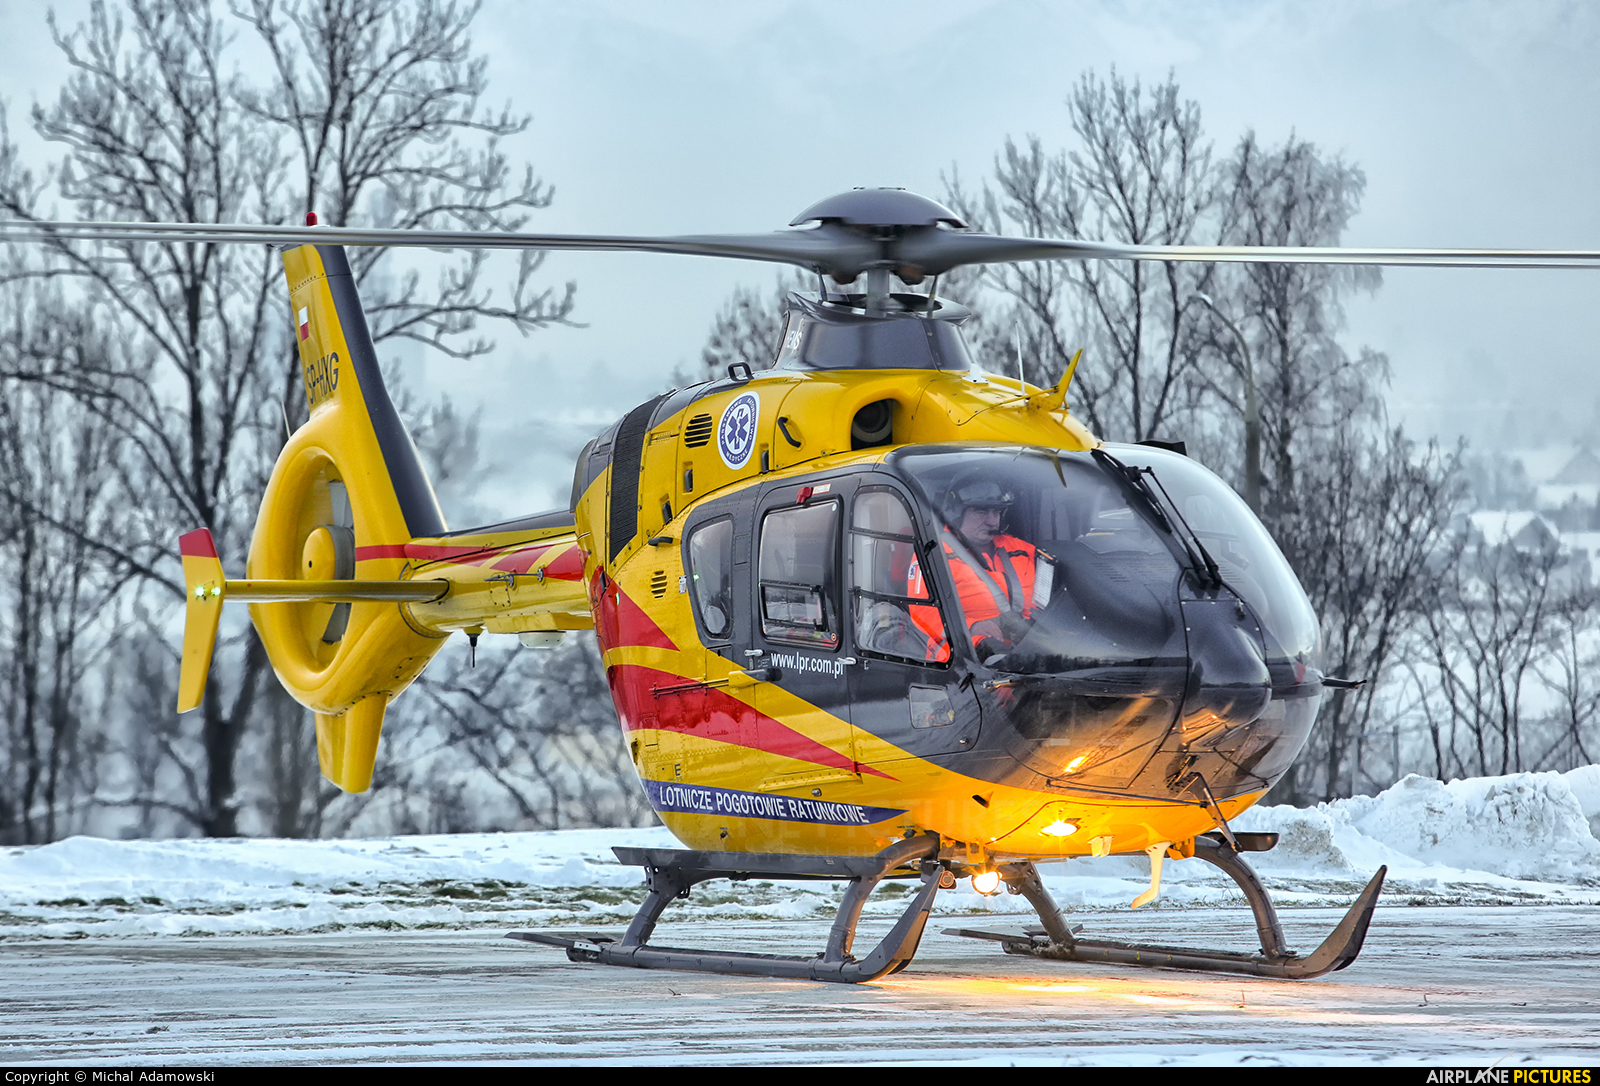 Polish Medical Air Rescue - Lotnicze Pogotowie Ratunkowe SP-HXG aircraft at Off Airport - Poland